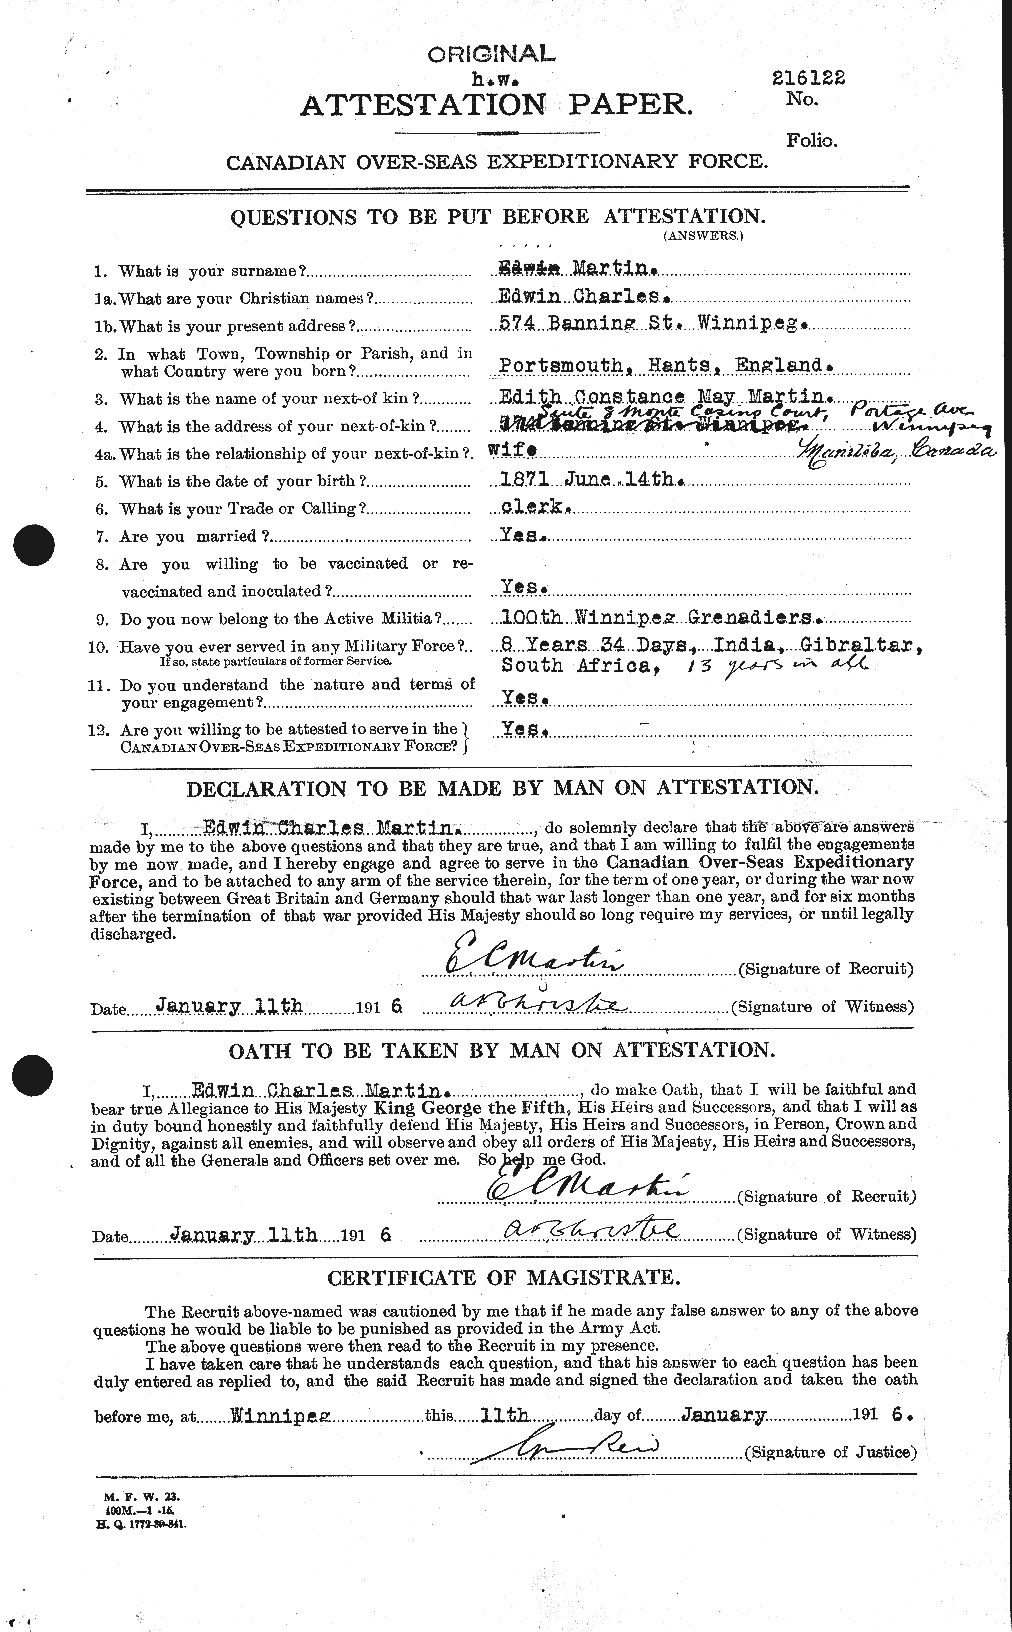 Personnel Records of the First World War - CEF 482899a